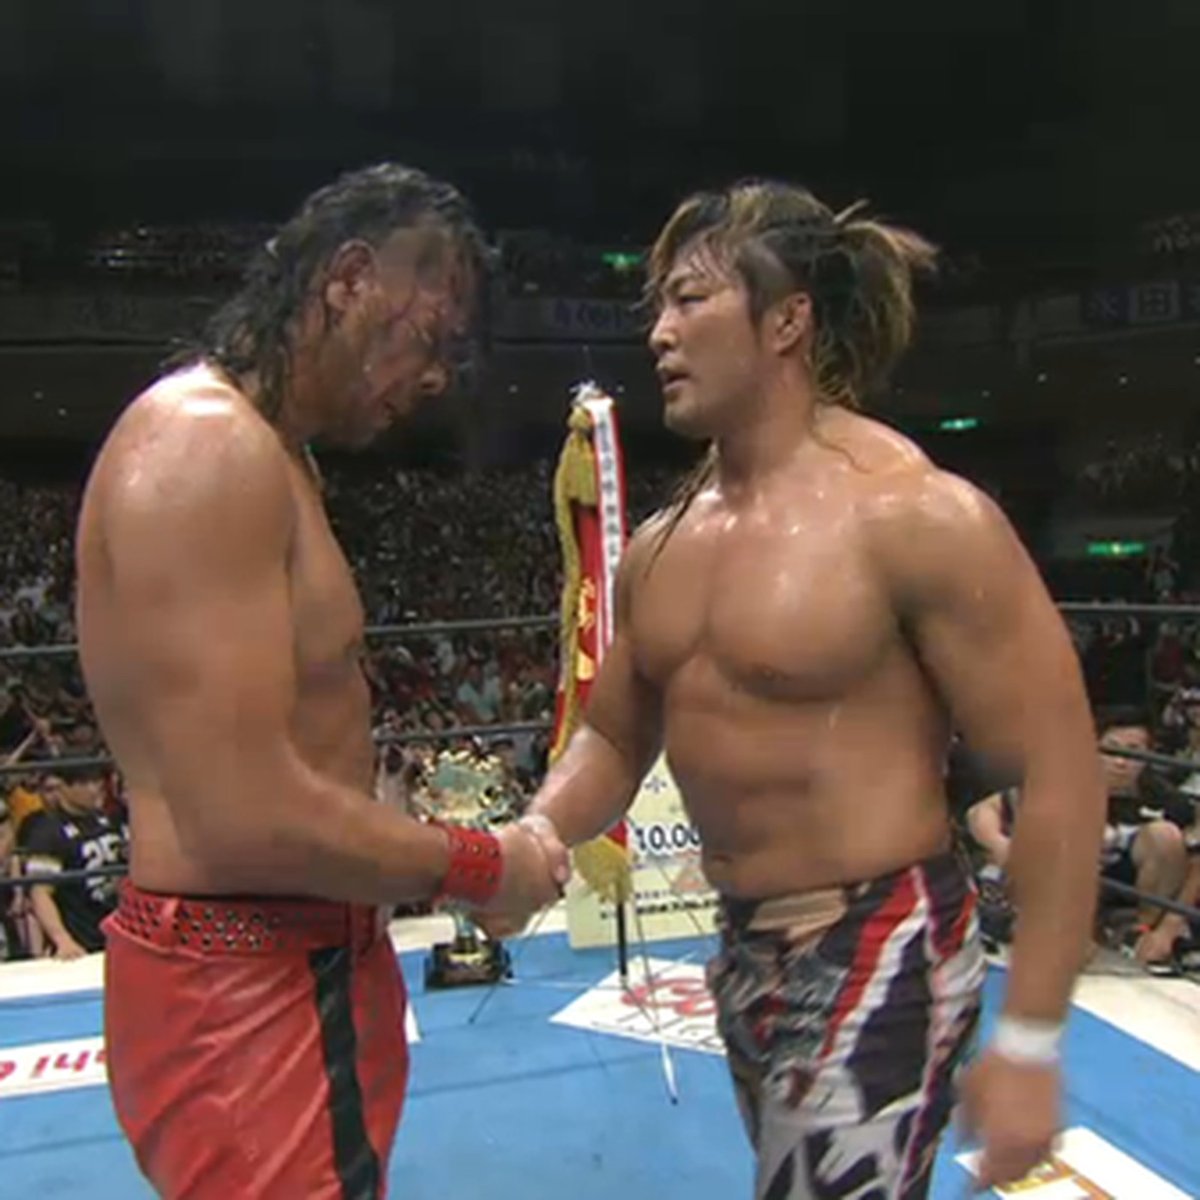 #38 Shinsuke Nakamura vs Hiroshi Tanahashi: NJPW 8/16/15 - A pairing I certainly don't always love together but it was magic on this night.